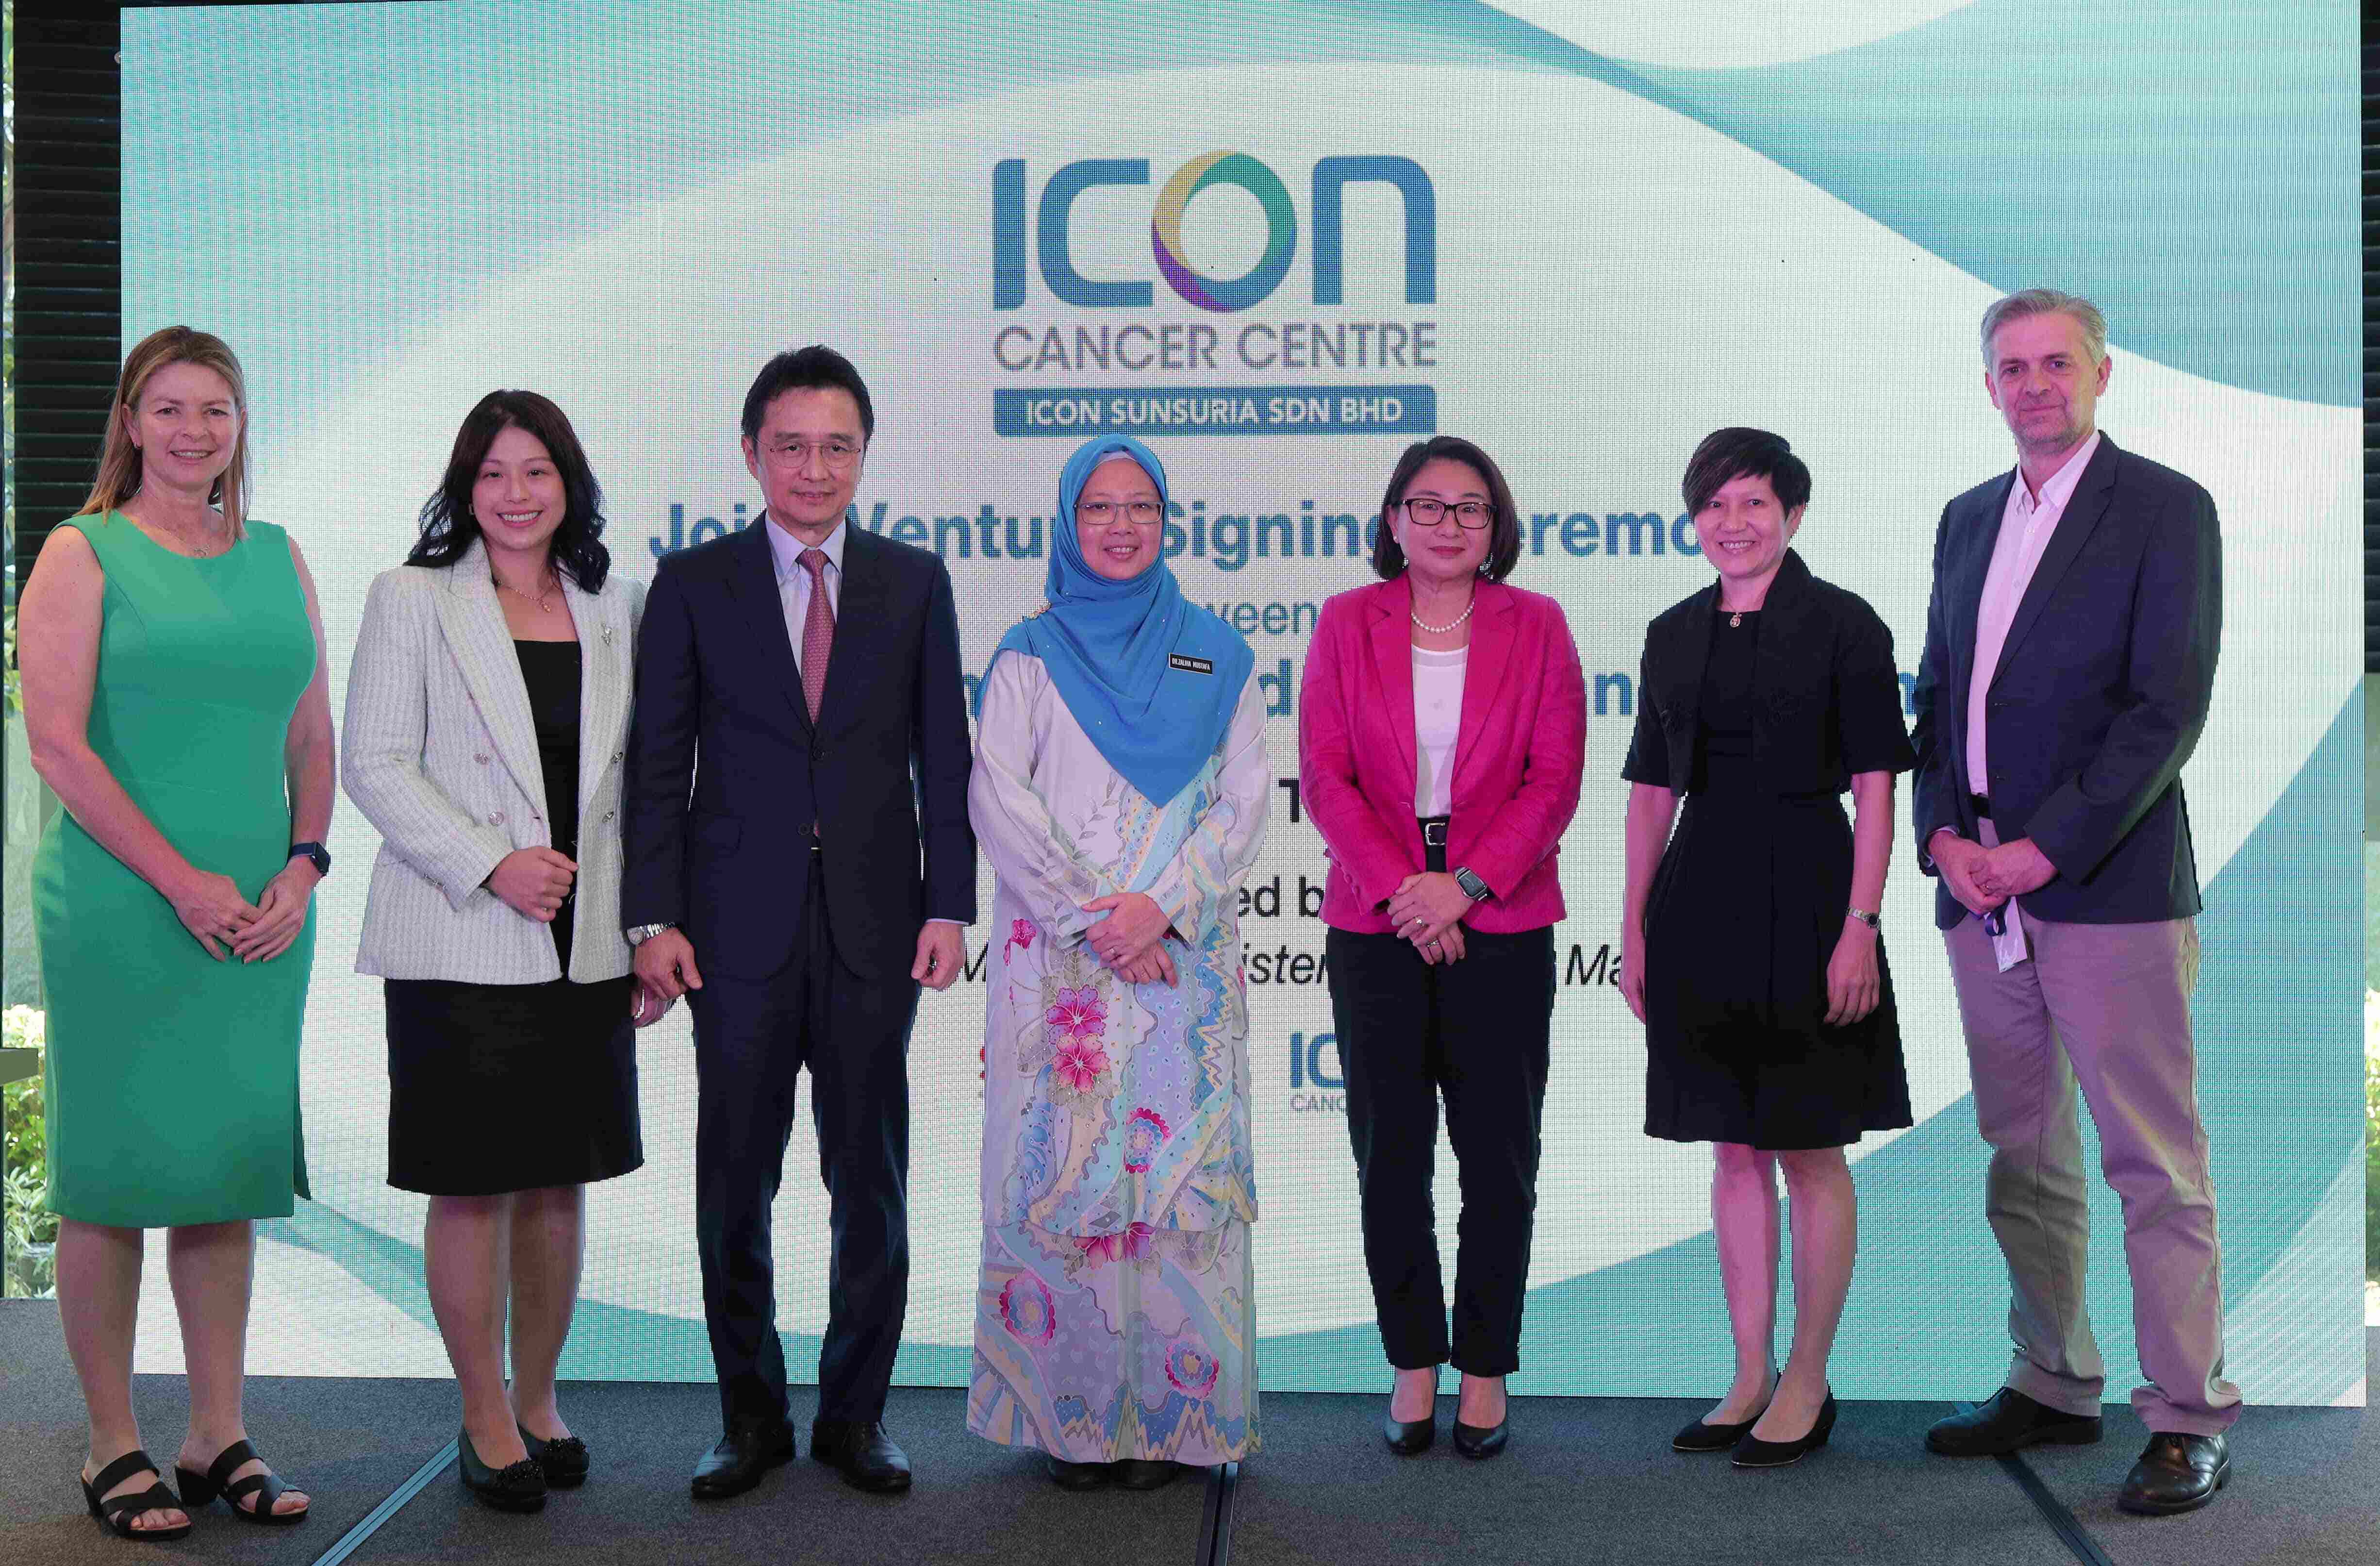 Icon Cancer Centre, Sunsuria Healthcare Partnership to Elevate Cancer Services in Malaysia